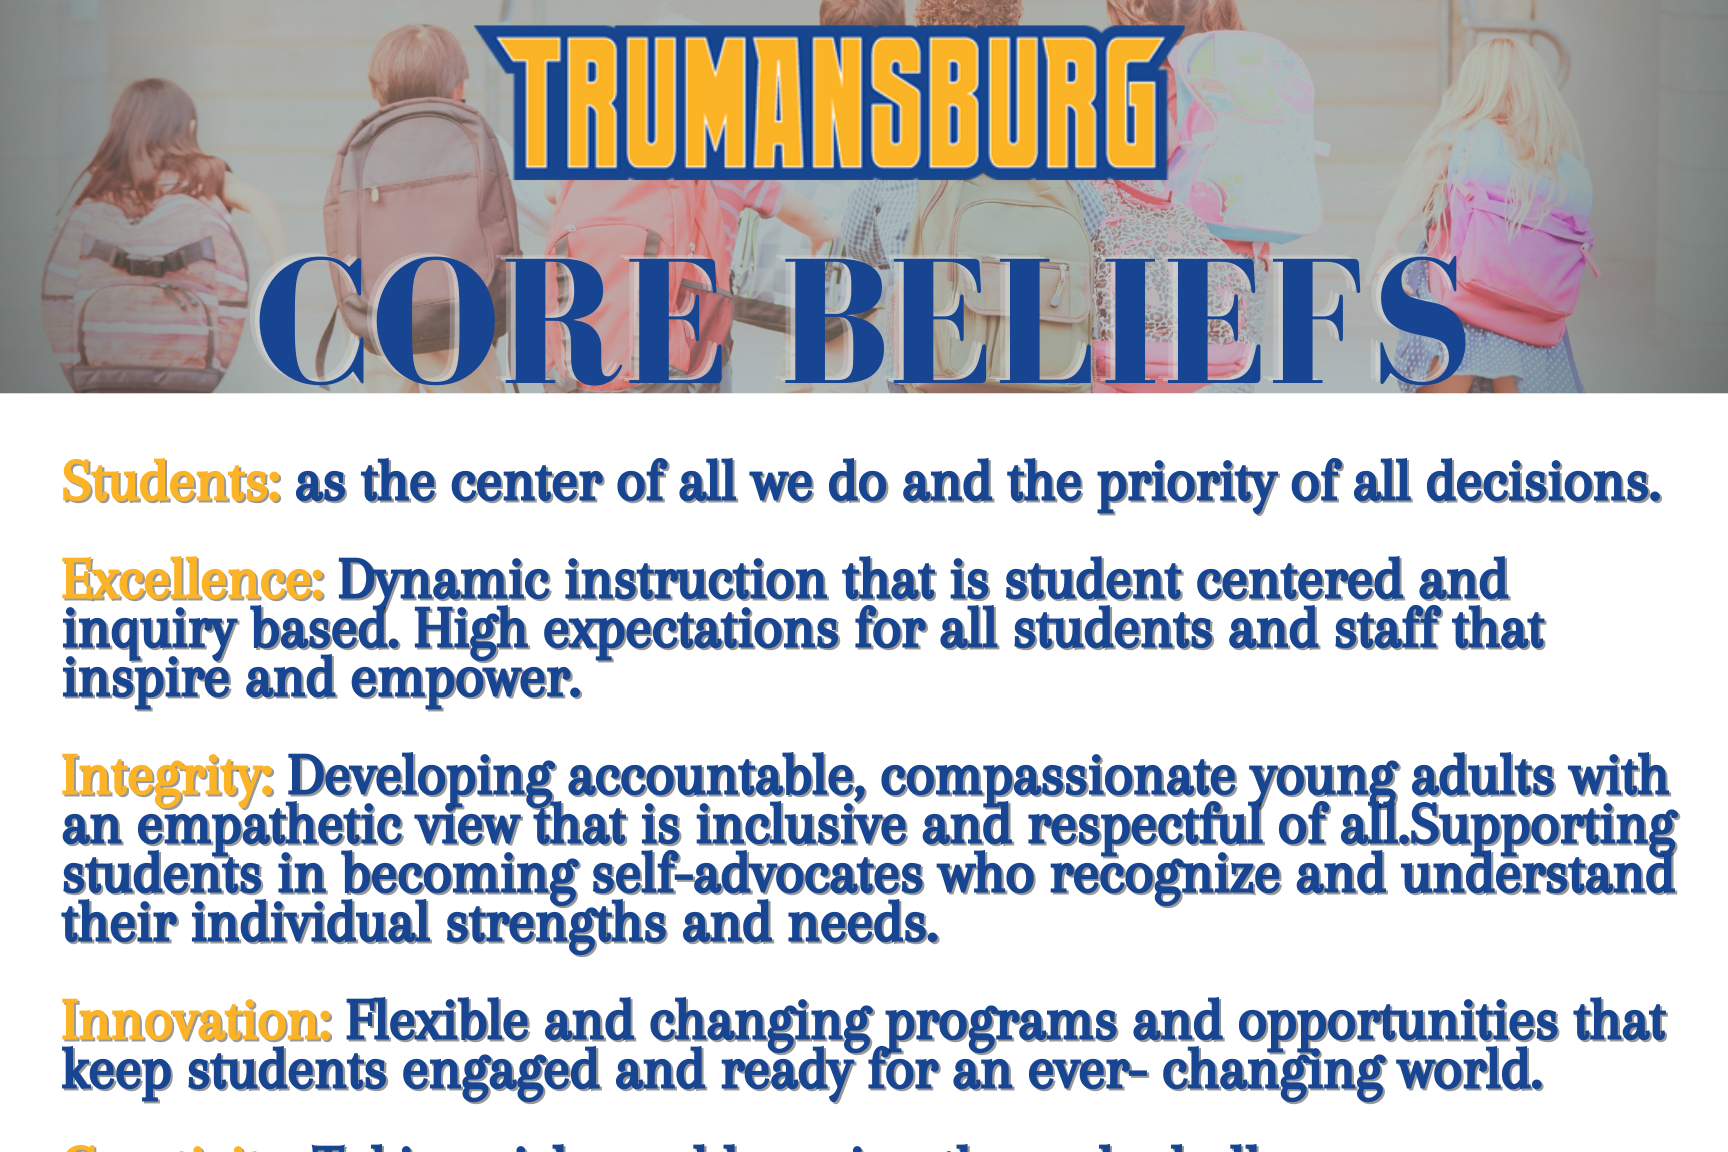 Core Beliefs - Students: as the center of all we do and the priority of all decisions  Excellence: Dynamic instruction that is student centered and inquiry based. High expectations for all students and staff that inspire and empower  Integrity: Developing accountable, compassionate young adults with an empathetic view that is inclusive and respectful of all. Supporting students in becoming self-advocates who recognize and understand their individual strengths and needs.  Innovation: Flexible and changing programs and opportunities that keep students engaged and ready for an every-changing world.